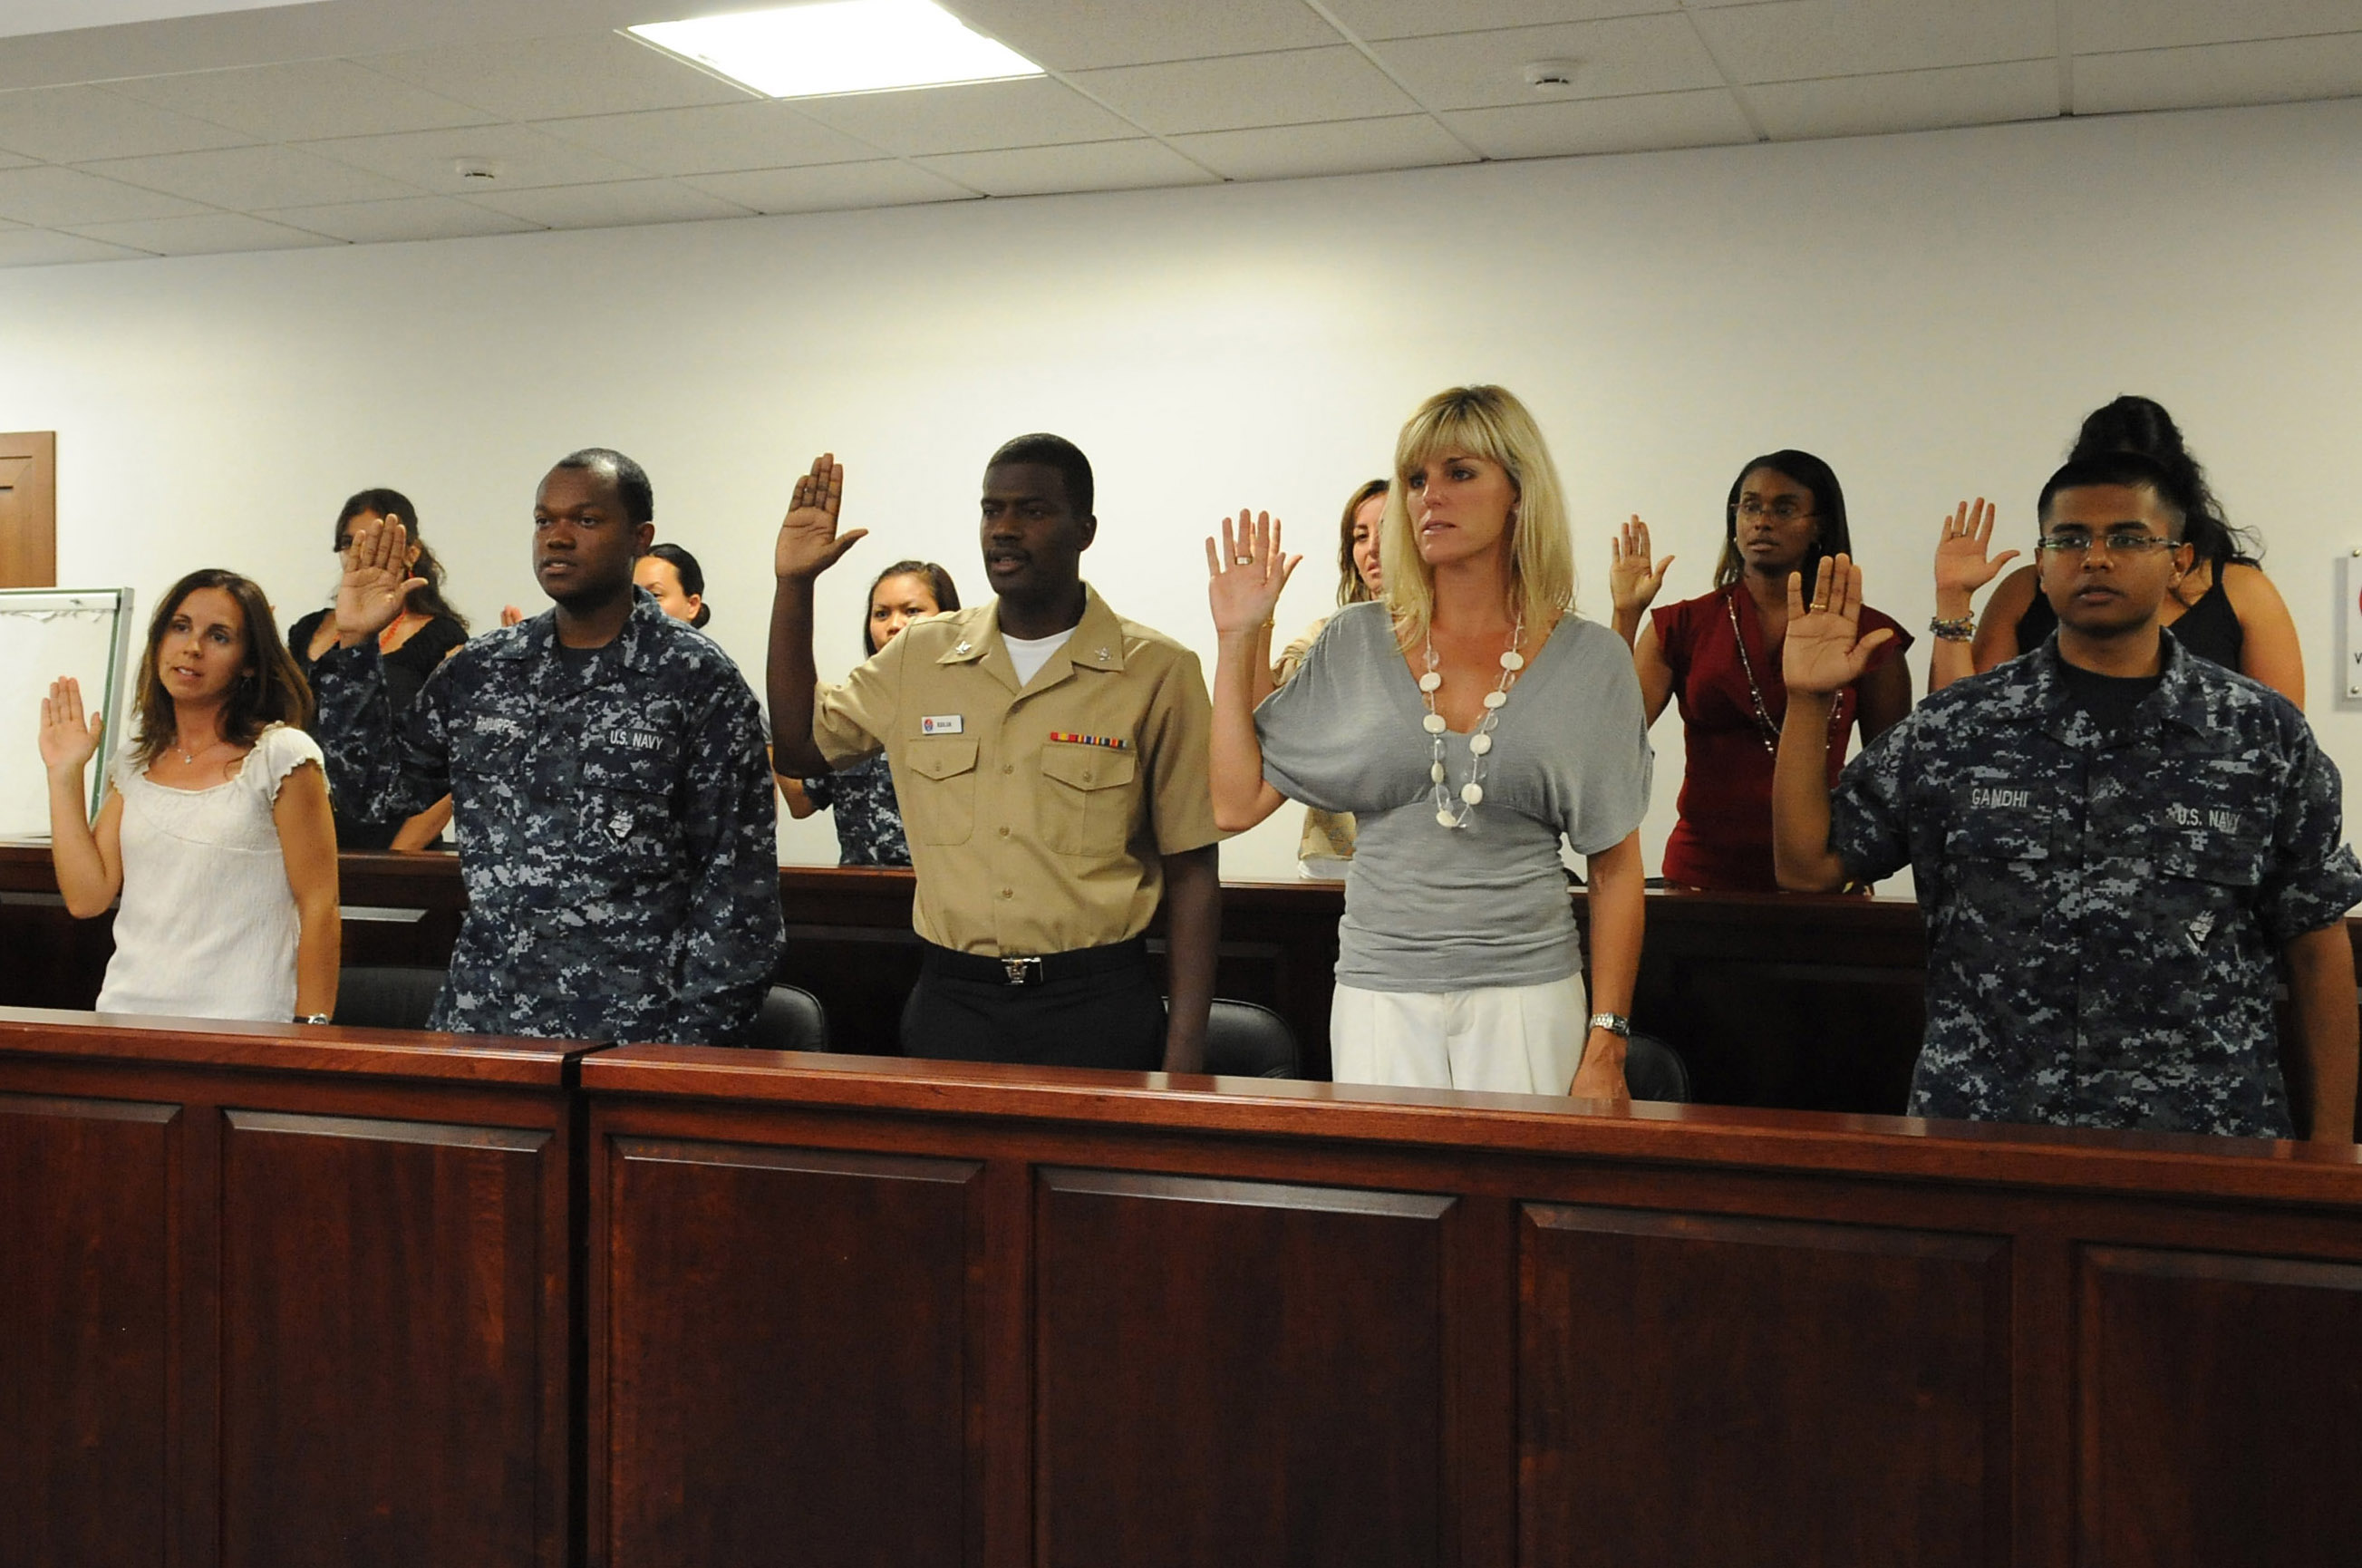 US Navy 100720-N-1938G-002 Candidates for U.S. citizenship recite the oath of citizenship during a naturalization ceremony at Naval Air Station Sigonella